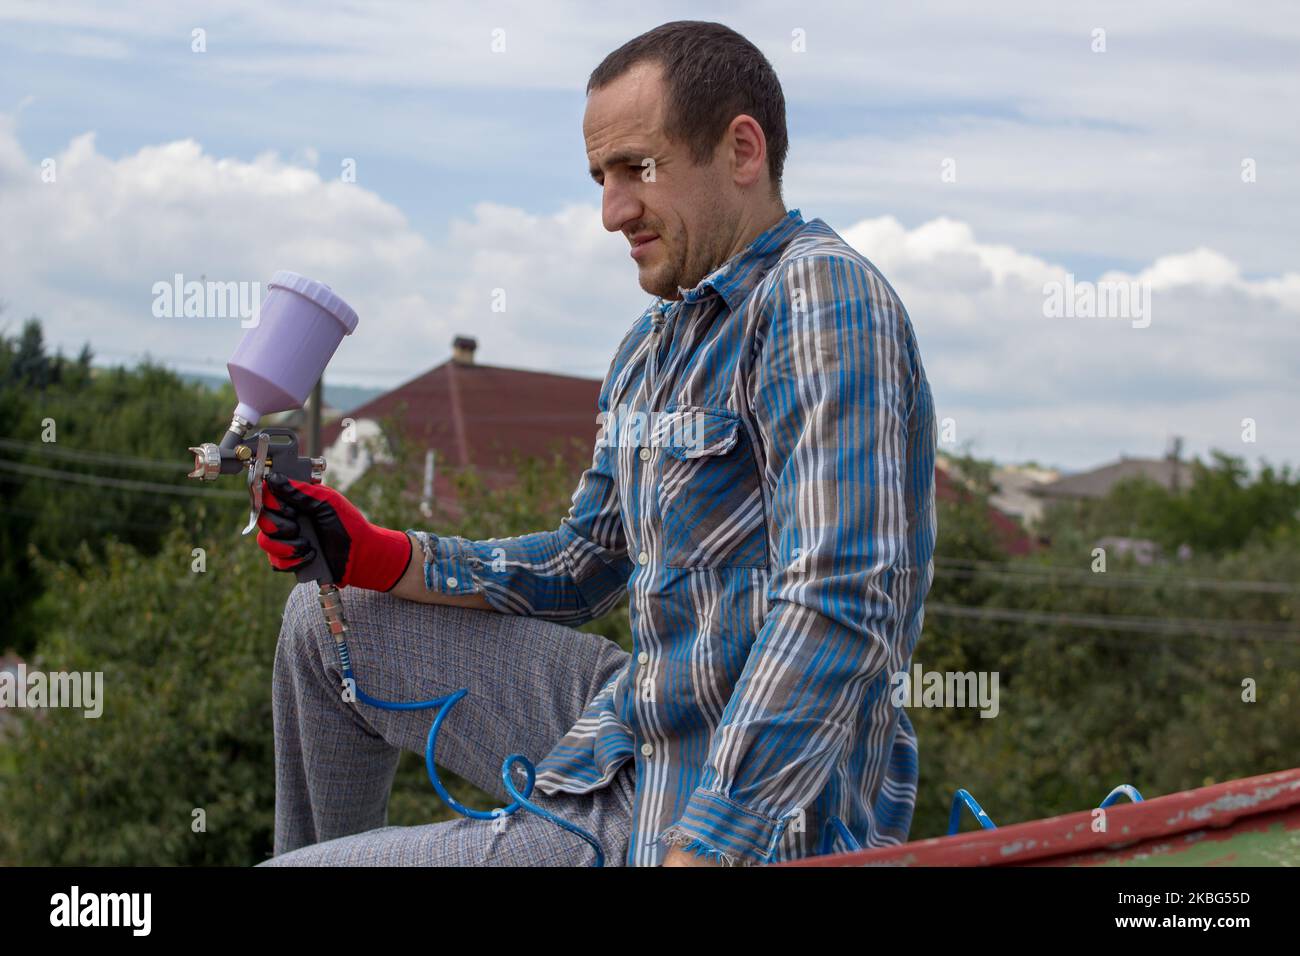 roofer builder worker with pulverizer spraying paint on metal sheet roof Stock Photo